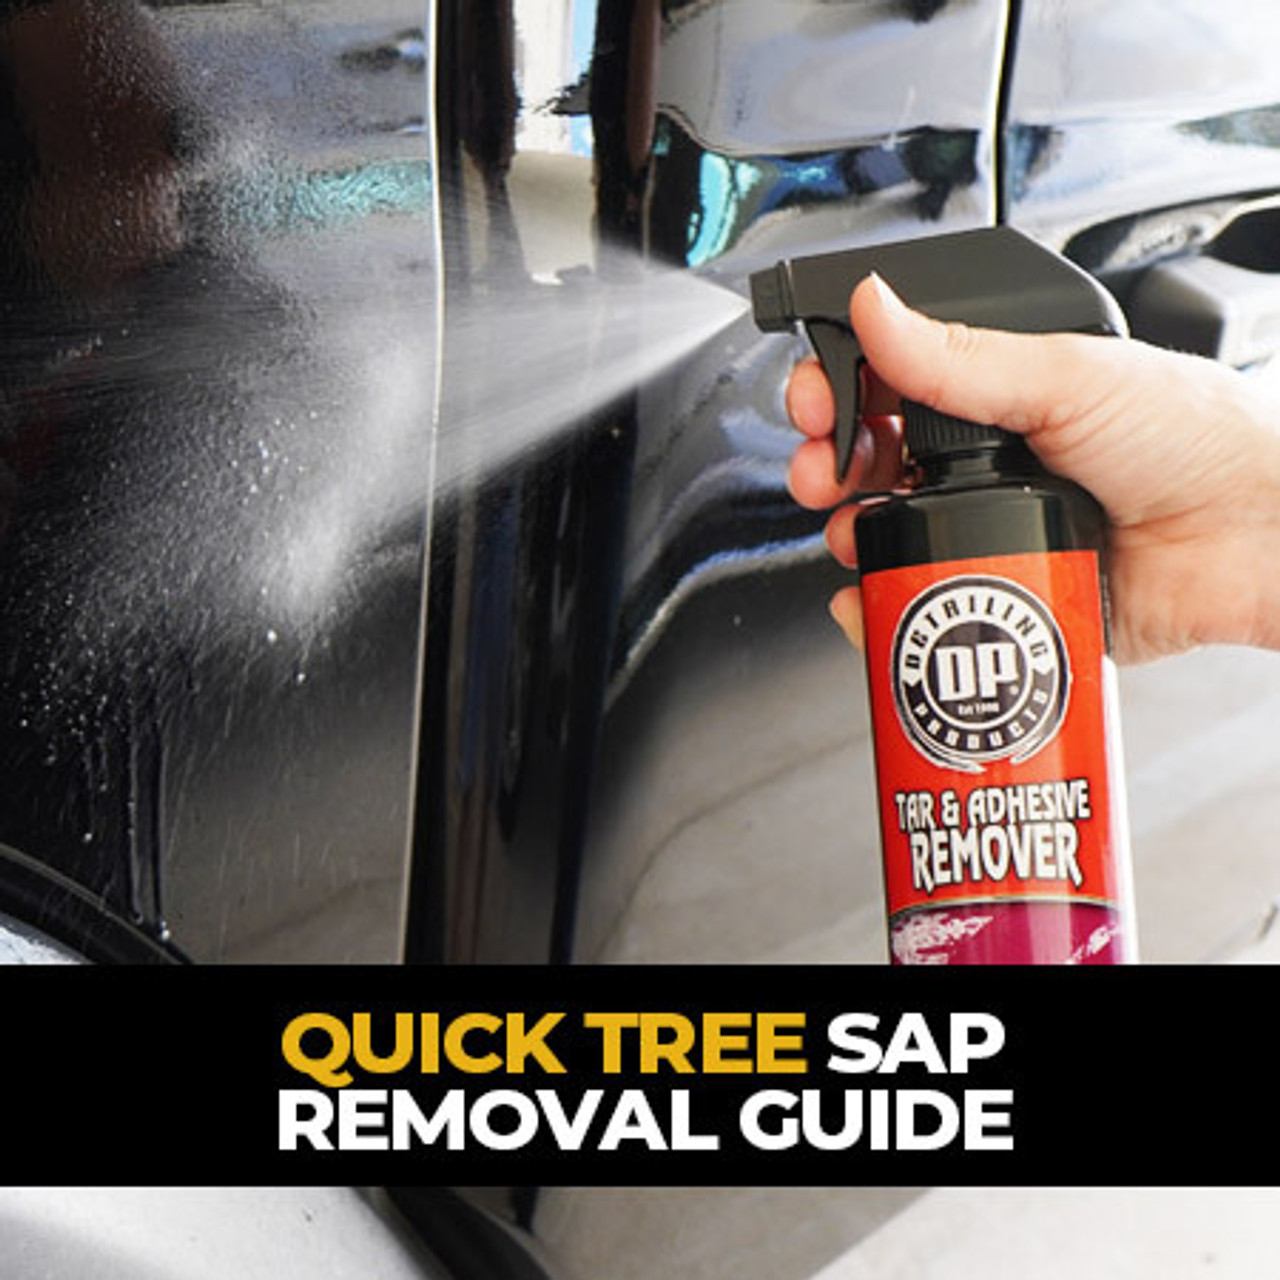 Quick Tree Sap Removal Guide